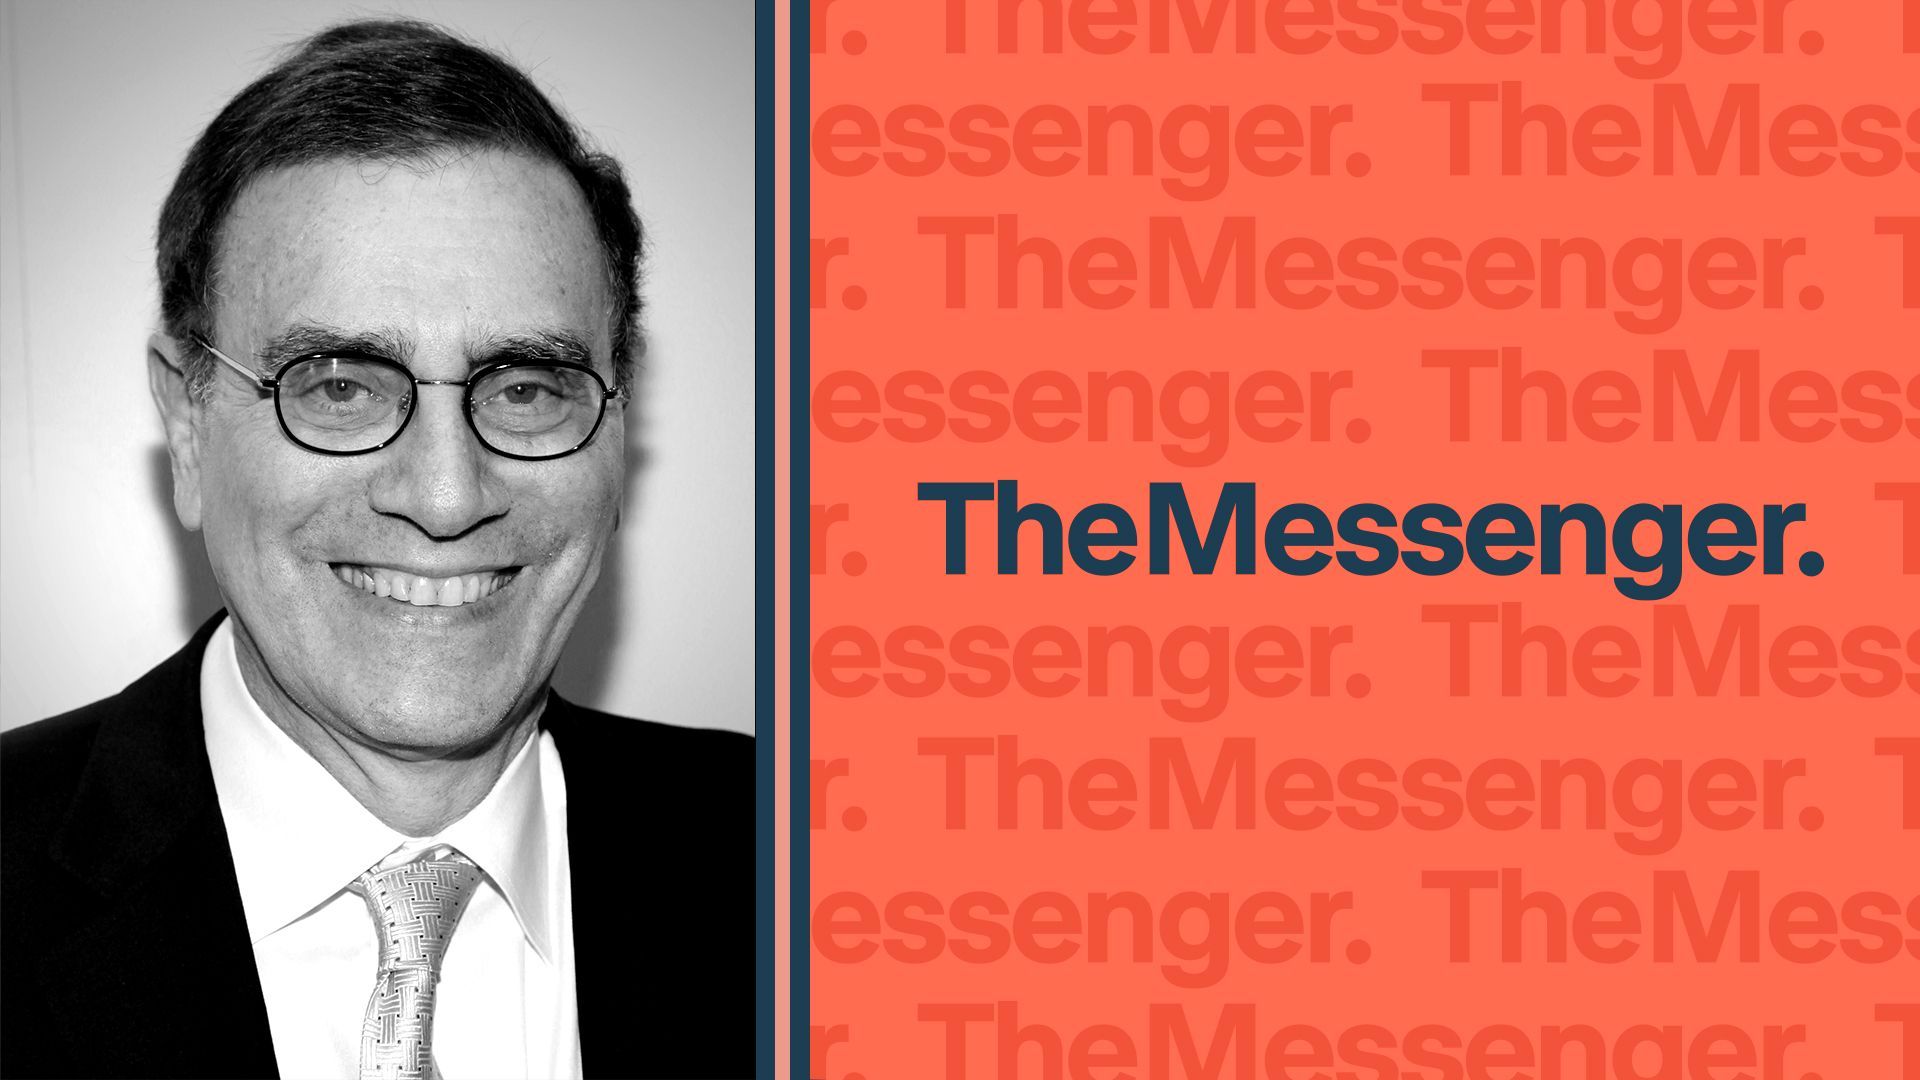 Photo illustration of Jimmy Finkelstein next to a pattern made from the logo of The Messenger.